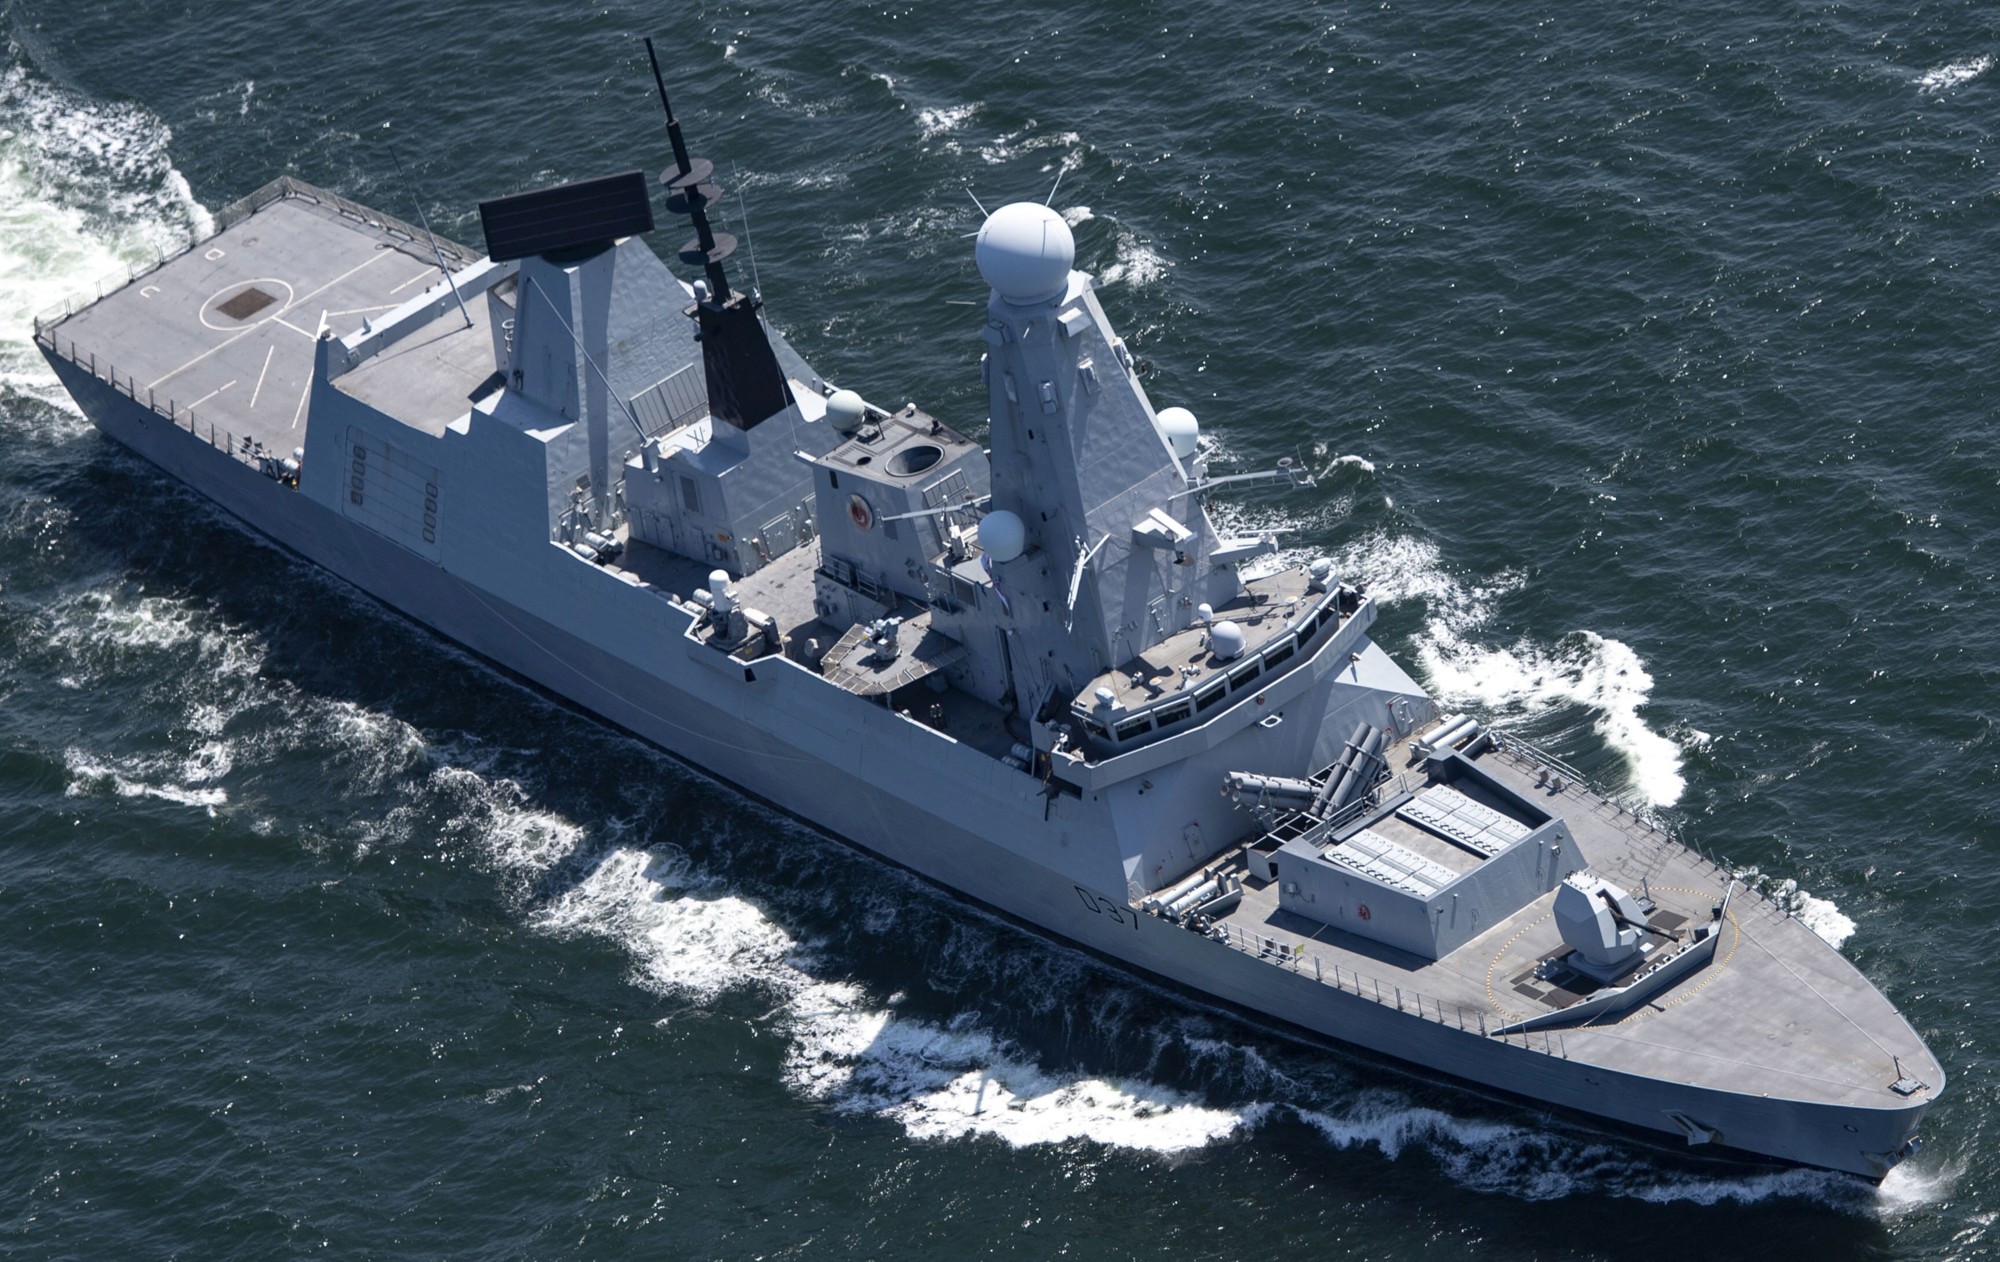 hms duncan d-37 type 45 daring class guided missile destroyer ddg royal navy sea viper paams 20